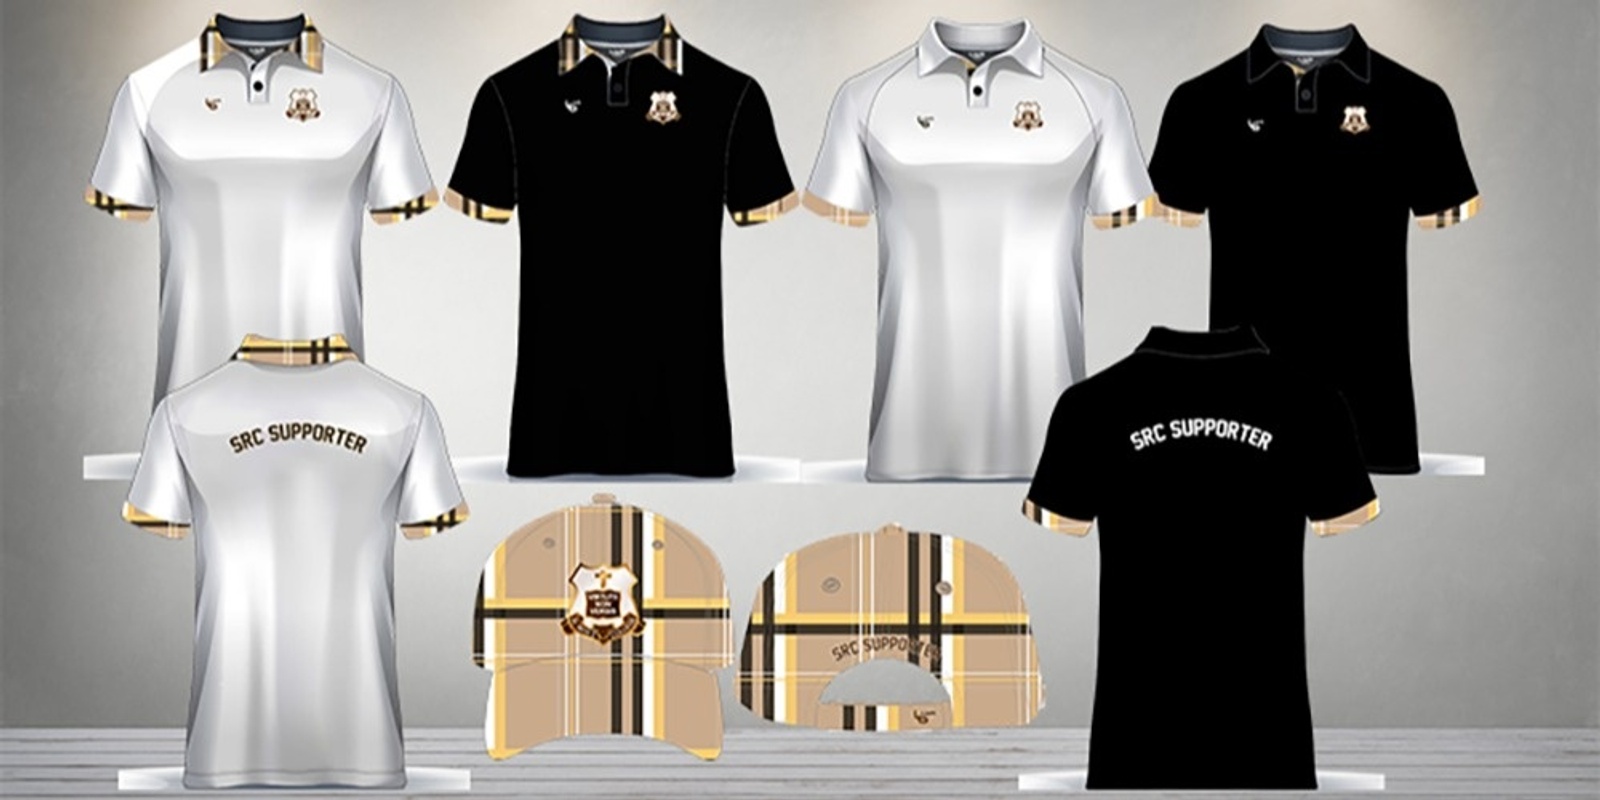 Banner image for St Rita's College Supporter Merchandise